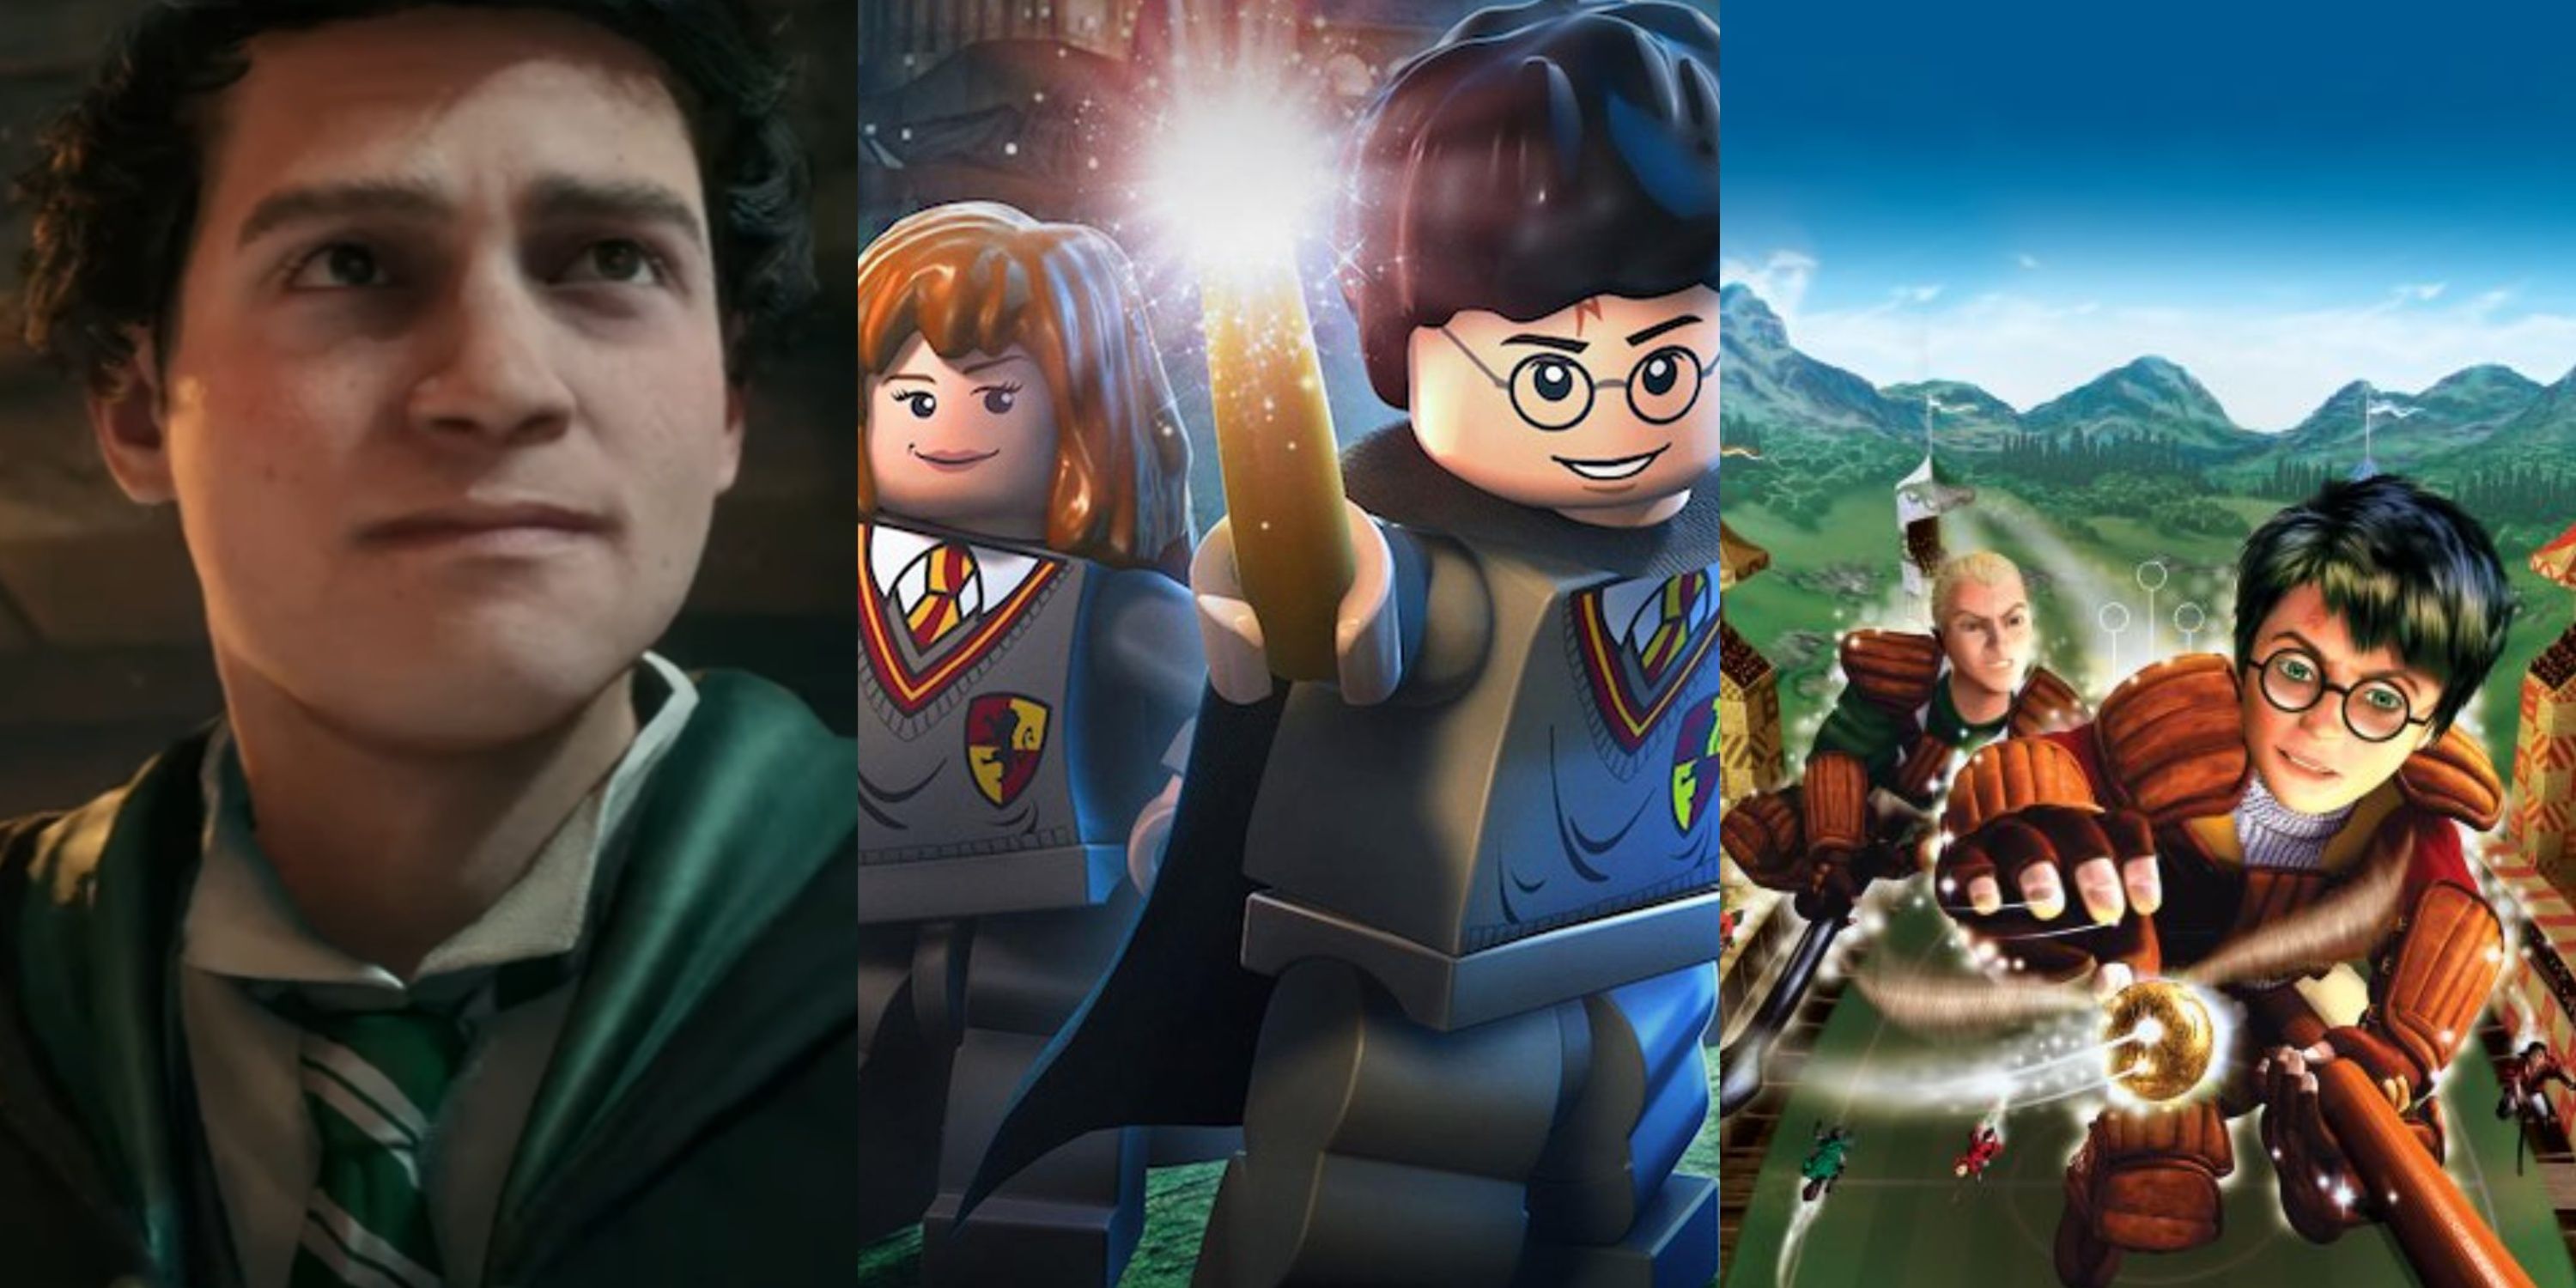 Split image of Sebastian Sallow, Lego Hermione and Harry, and Harry and Draco chasing the Snitch.